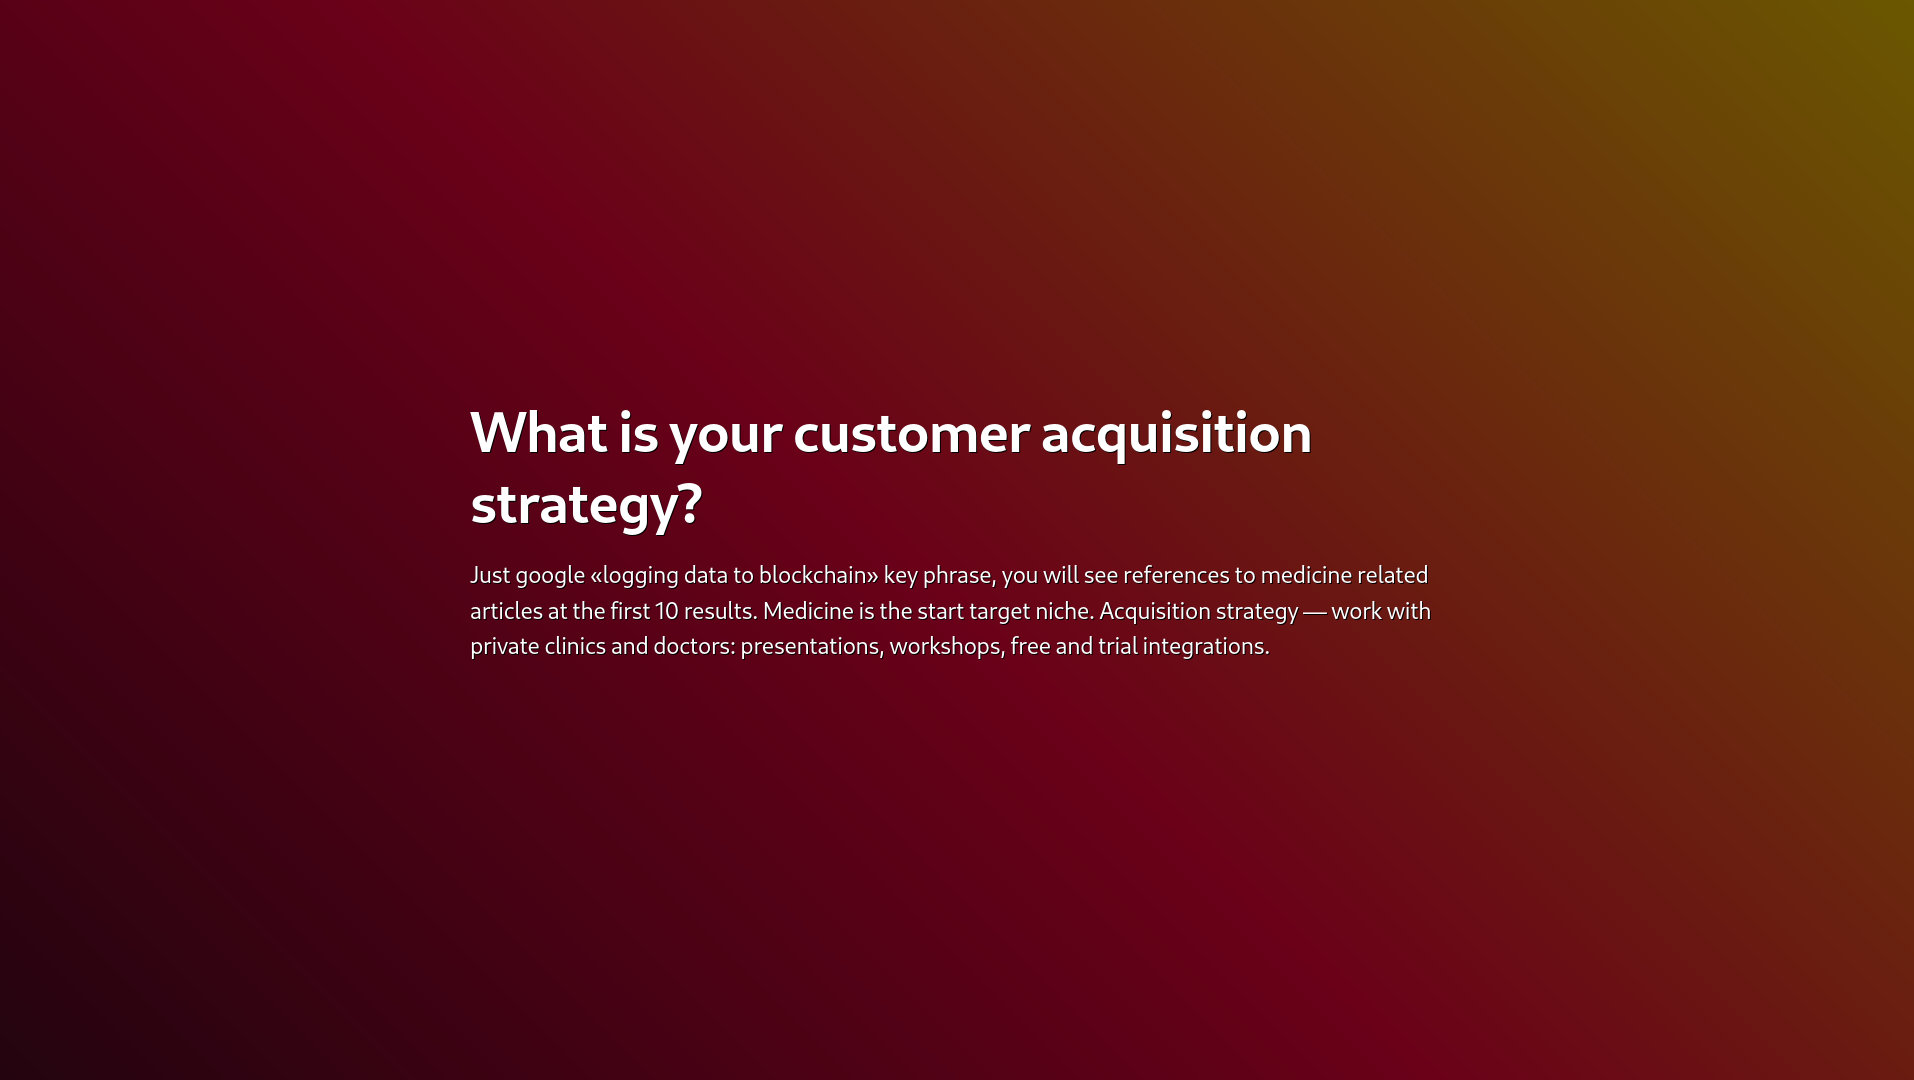 What is your customer acquisition strategy?